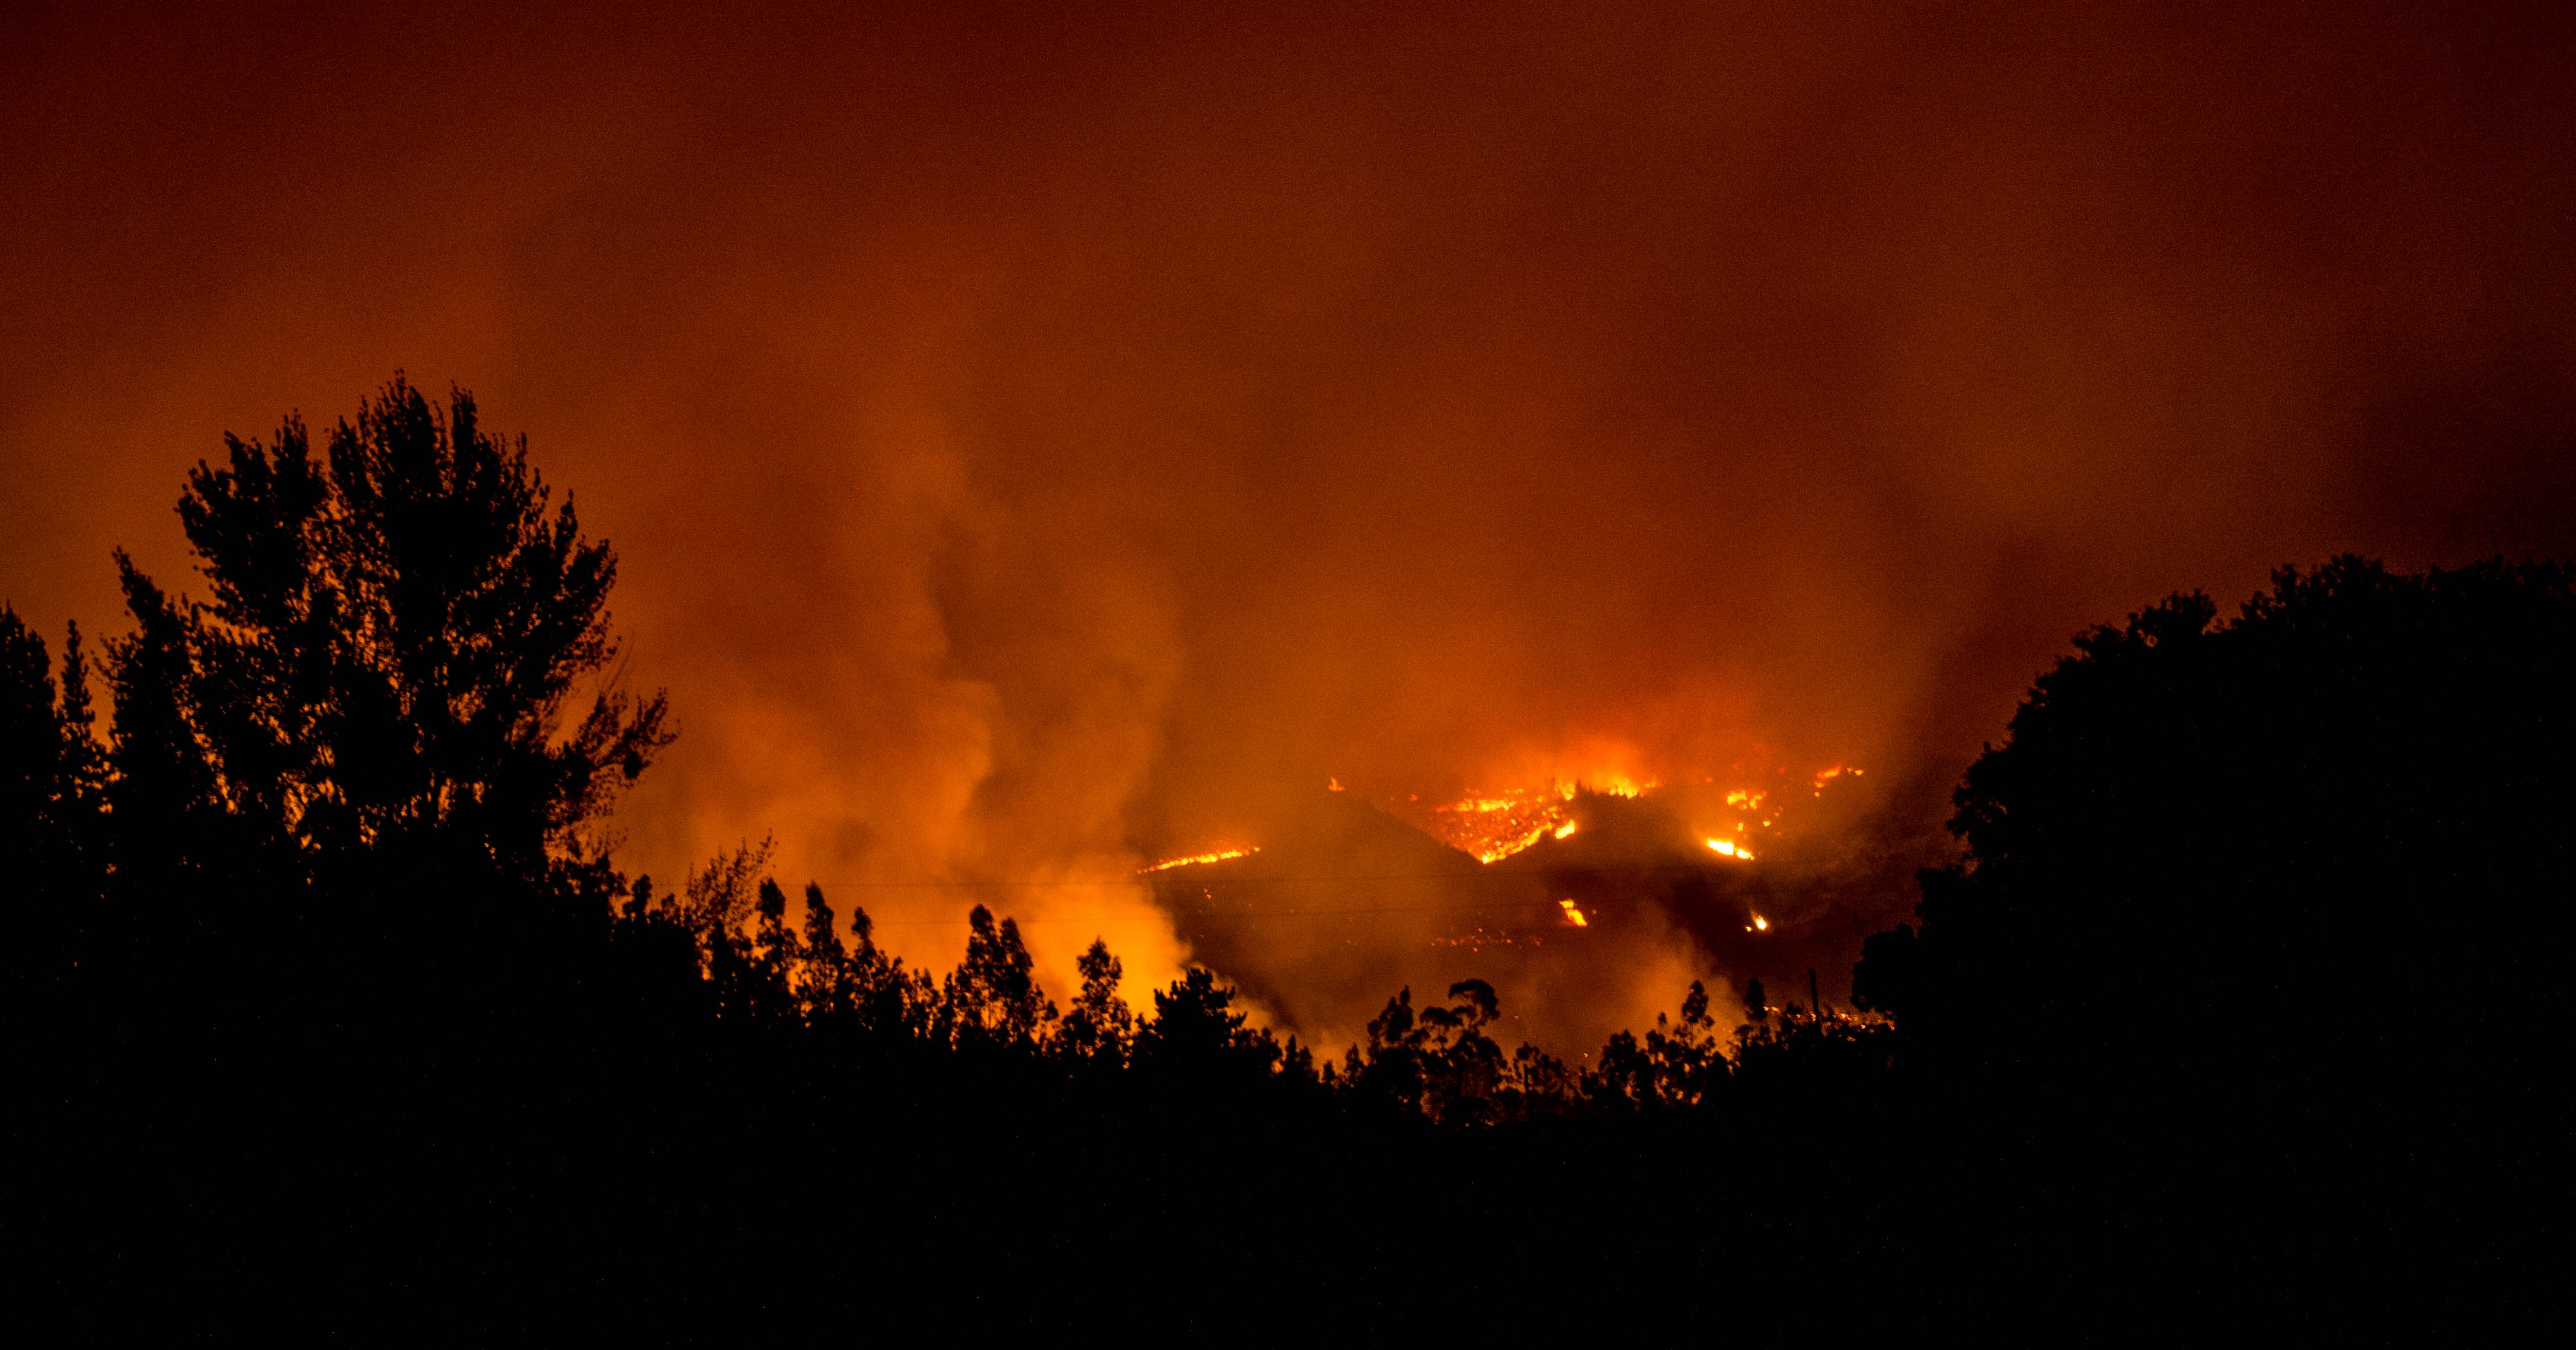 Picture taken during a forest fire in Vichuquen, 283 km south of Santiago, on January 24, 2017. Chile's president ordered extra funds Tuesday to be spent on fighting the country's worst forest fires ever, as frantic locals called for help to save their homes, animals and farmland. Flames have destroyed 155,000 hectares (600 square miles) of land in the center of the country and at least 4,000 people have been evacuated, the National Emergency Office said.  / AFP PHOTO / Martin BERNETTI